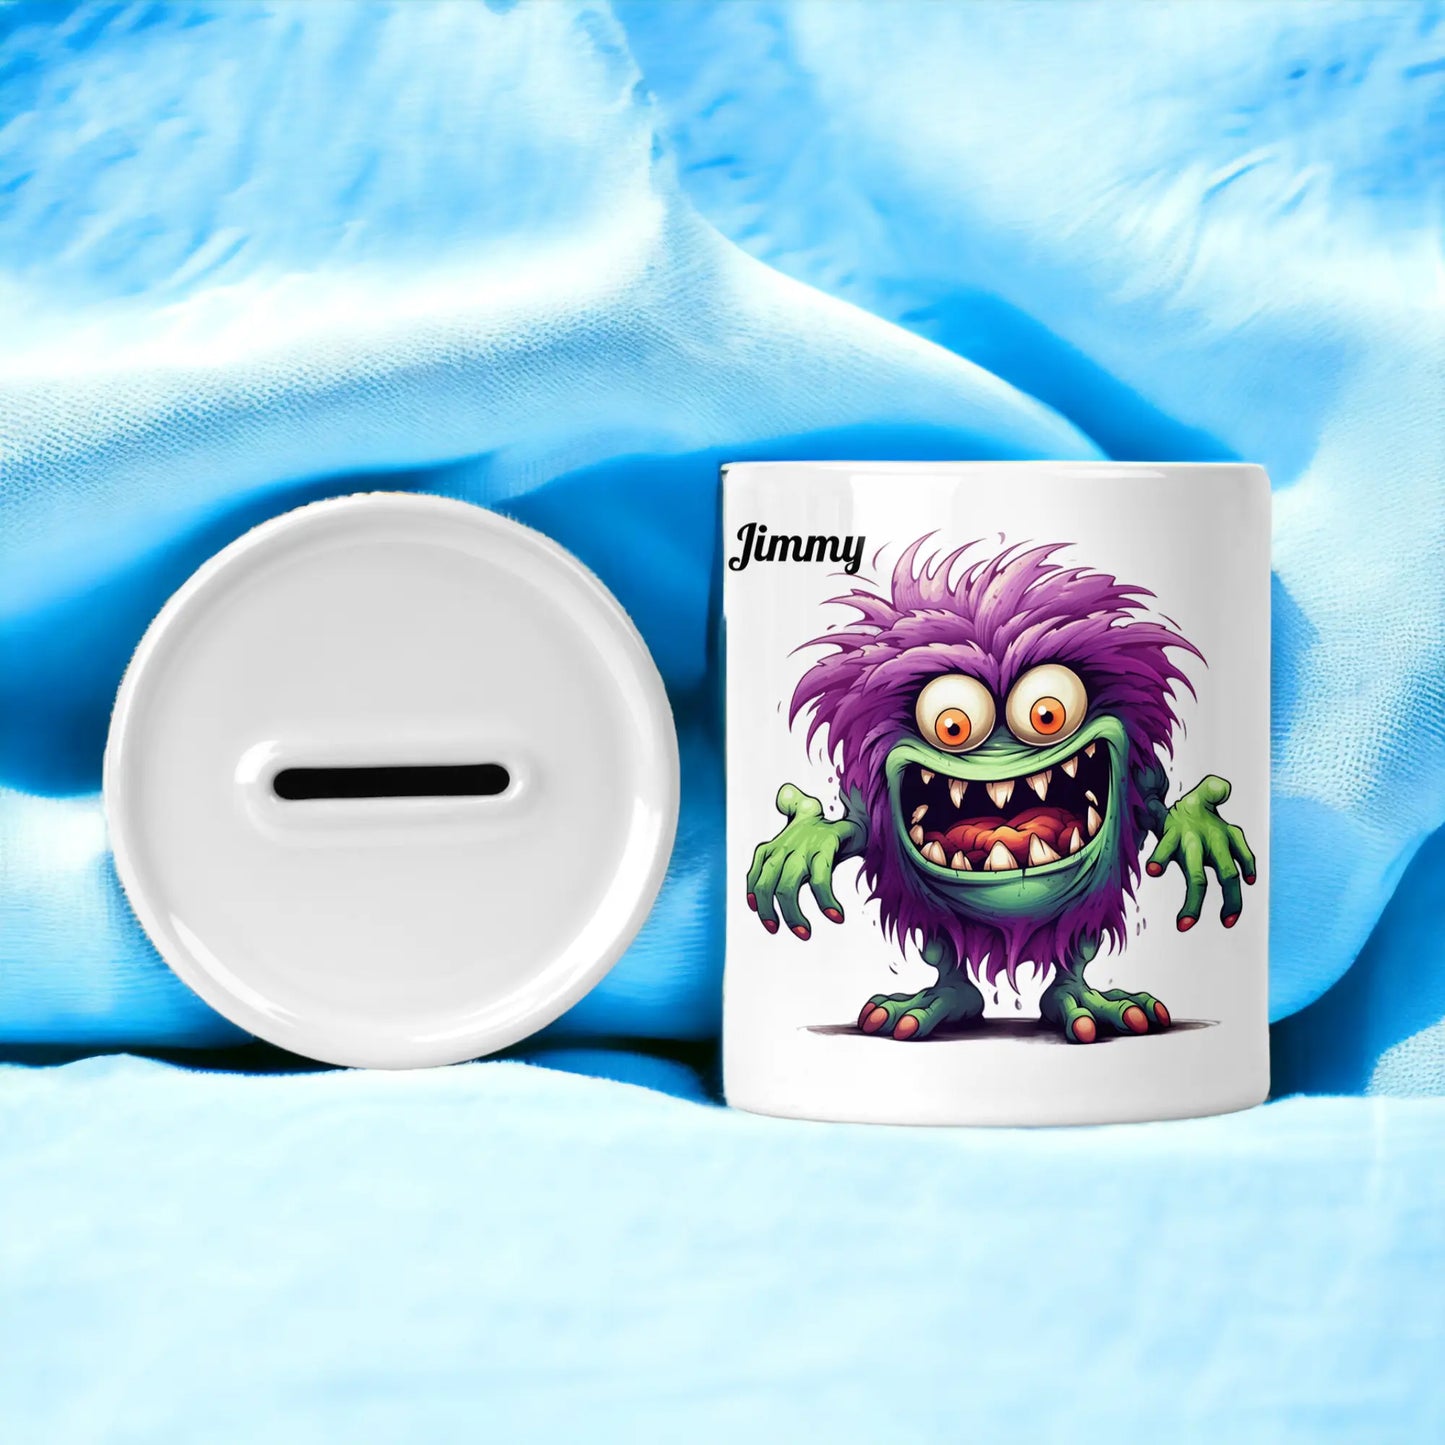  Personalised Little Monsters Money Box - Choice of 5 Unique Designs by Free Spirit Accessories sold by Free Spirit Accessories